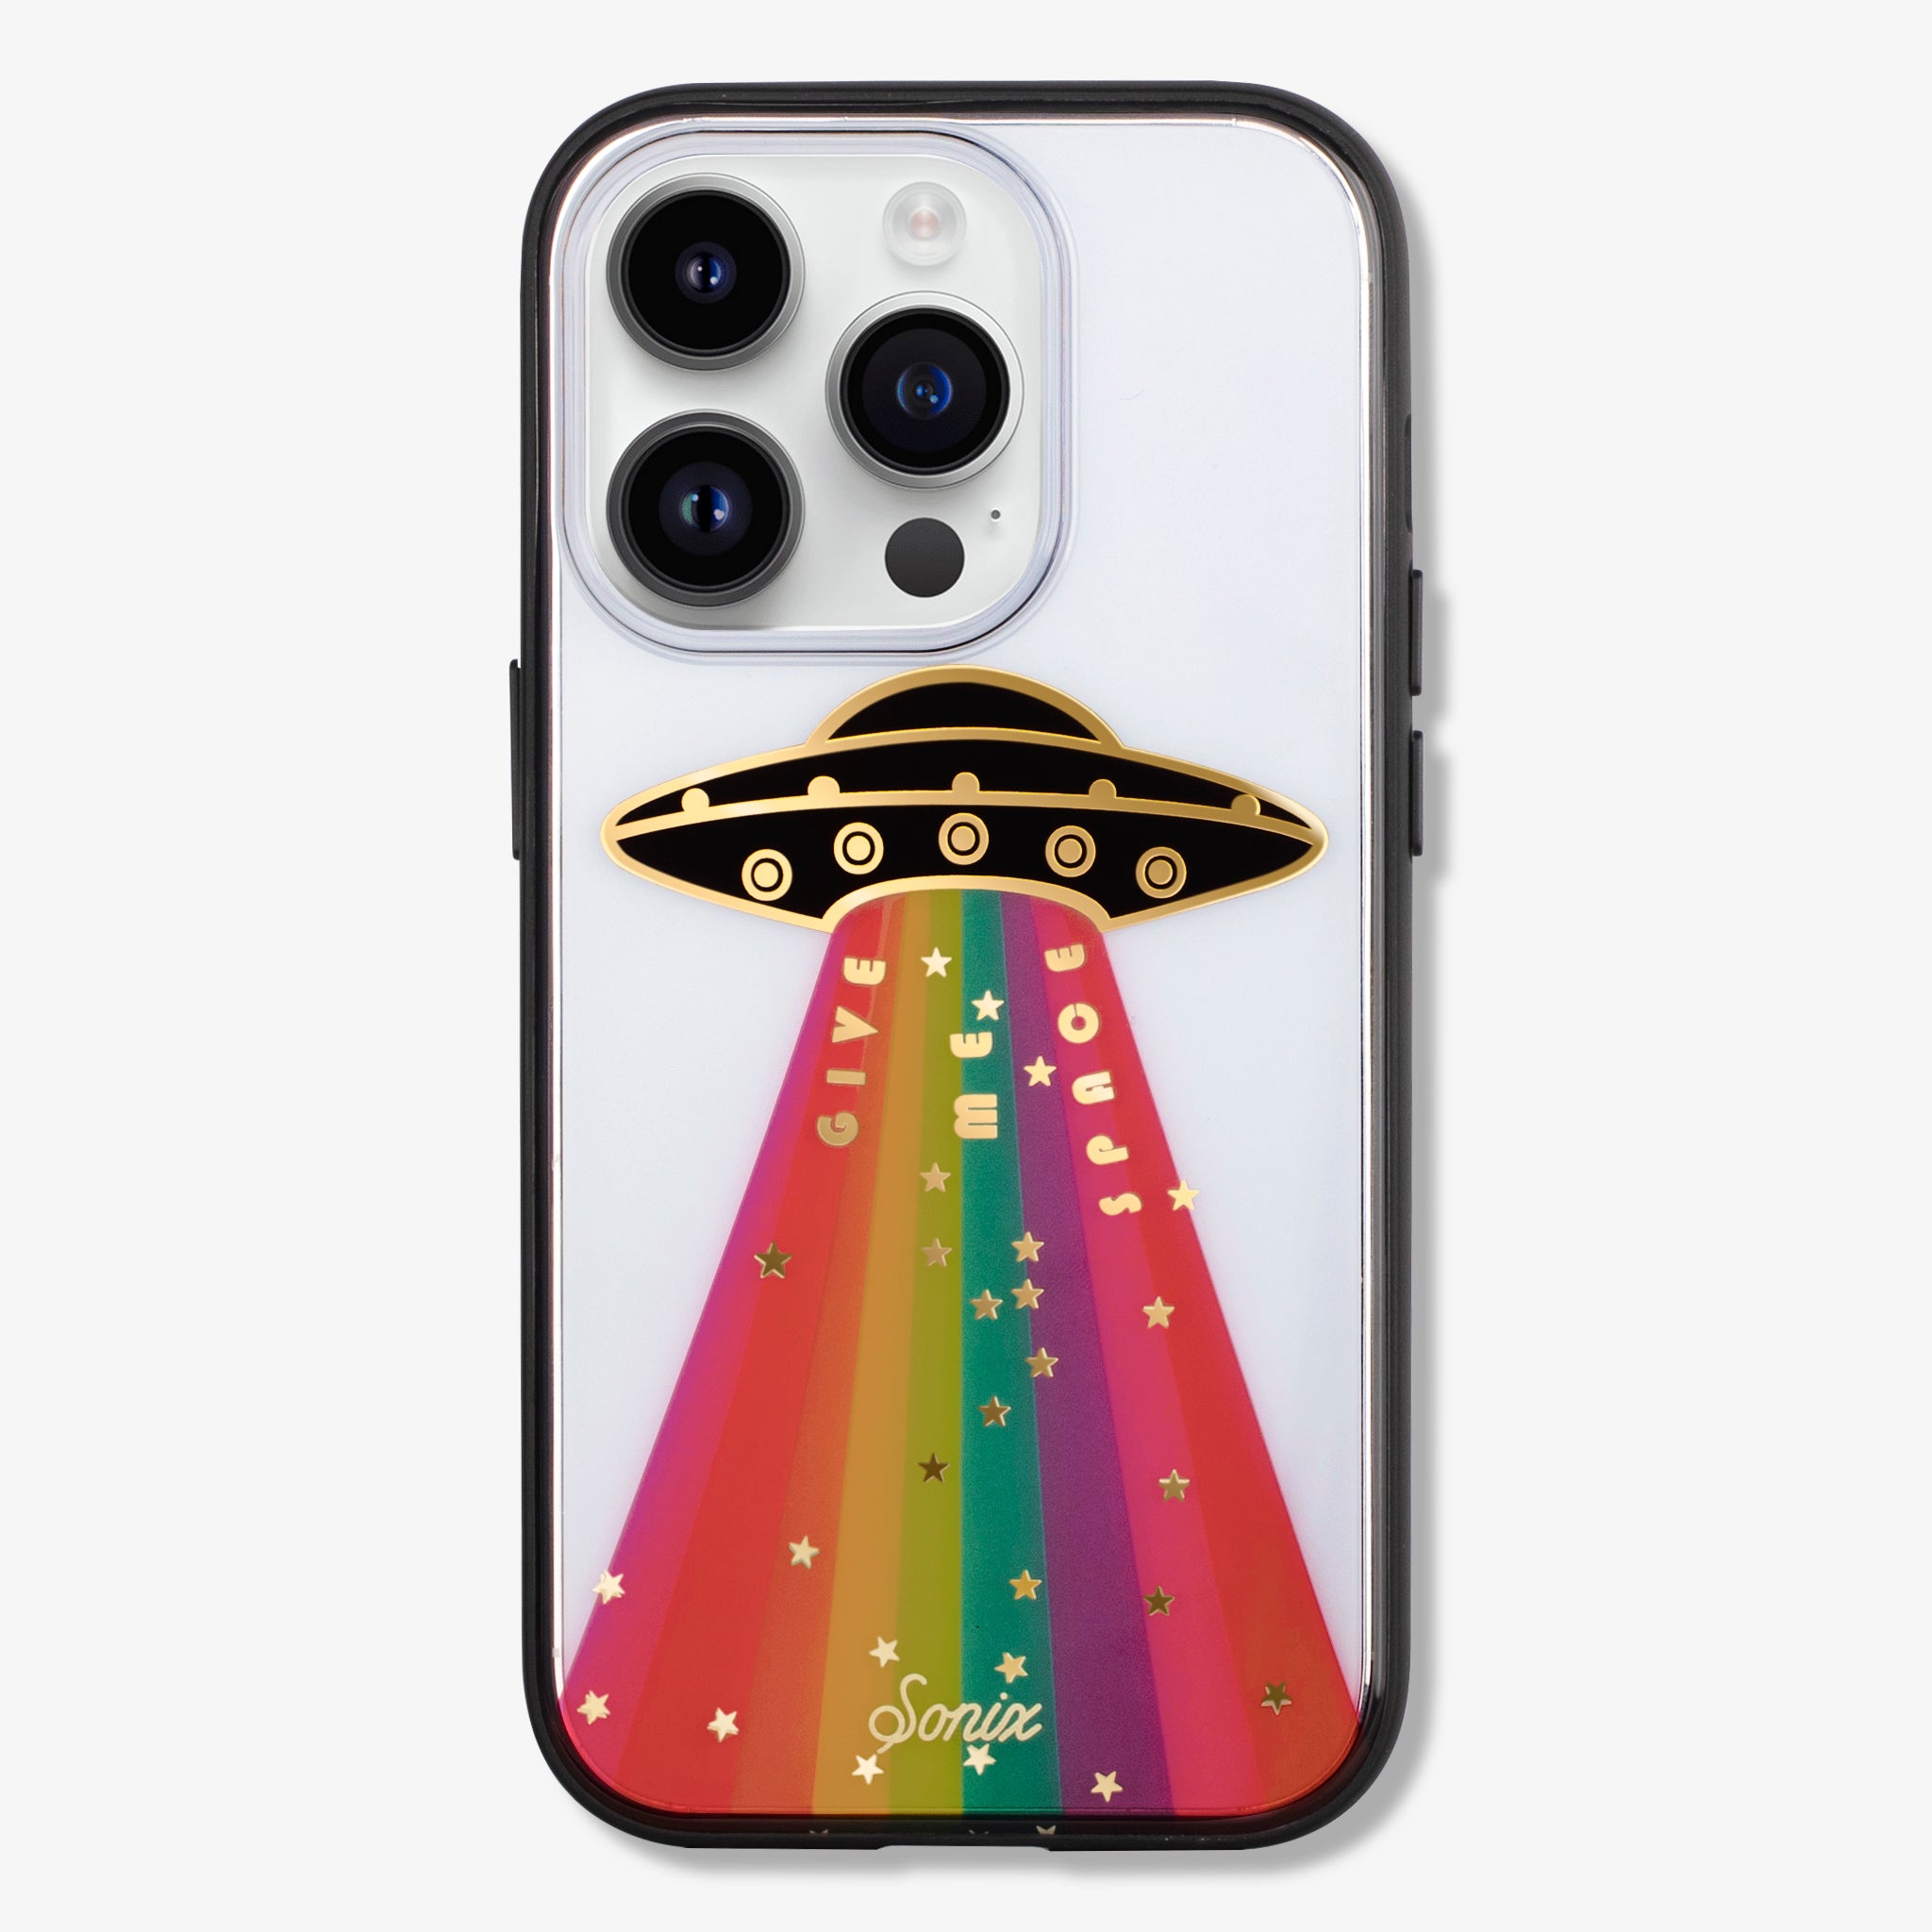 Give Me Space iPhone Case – Sonix